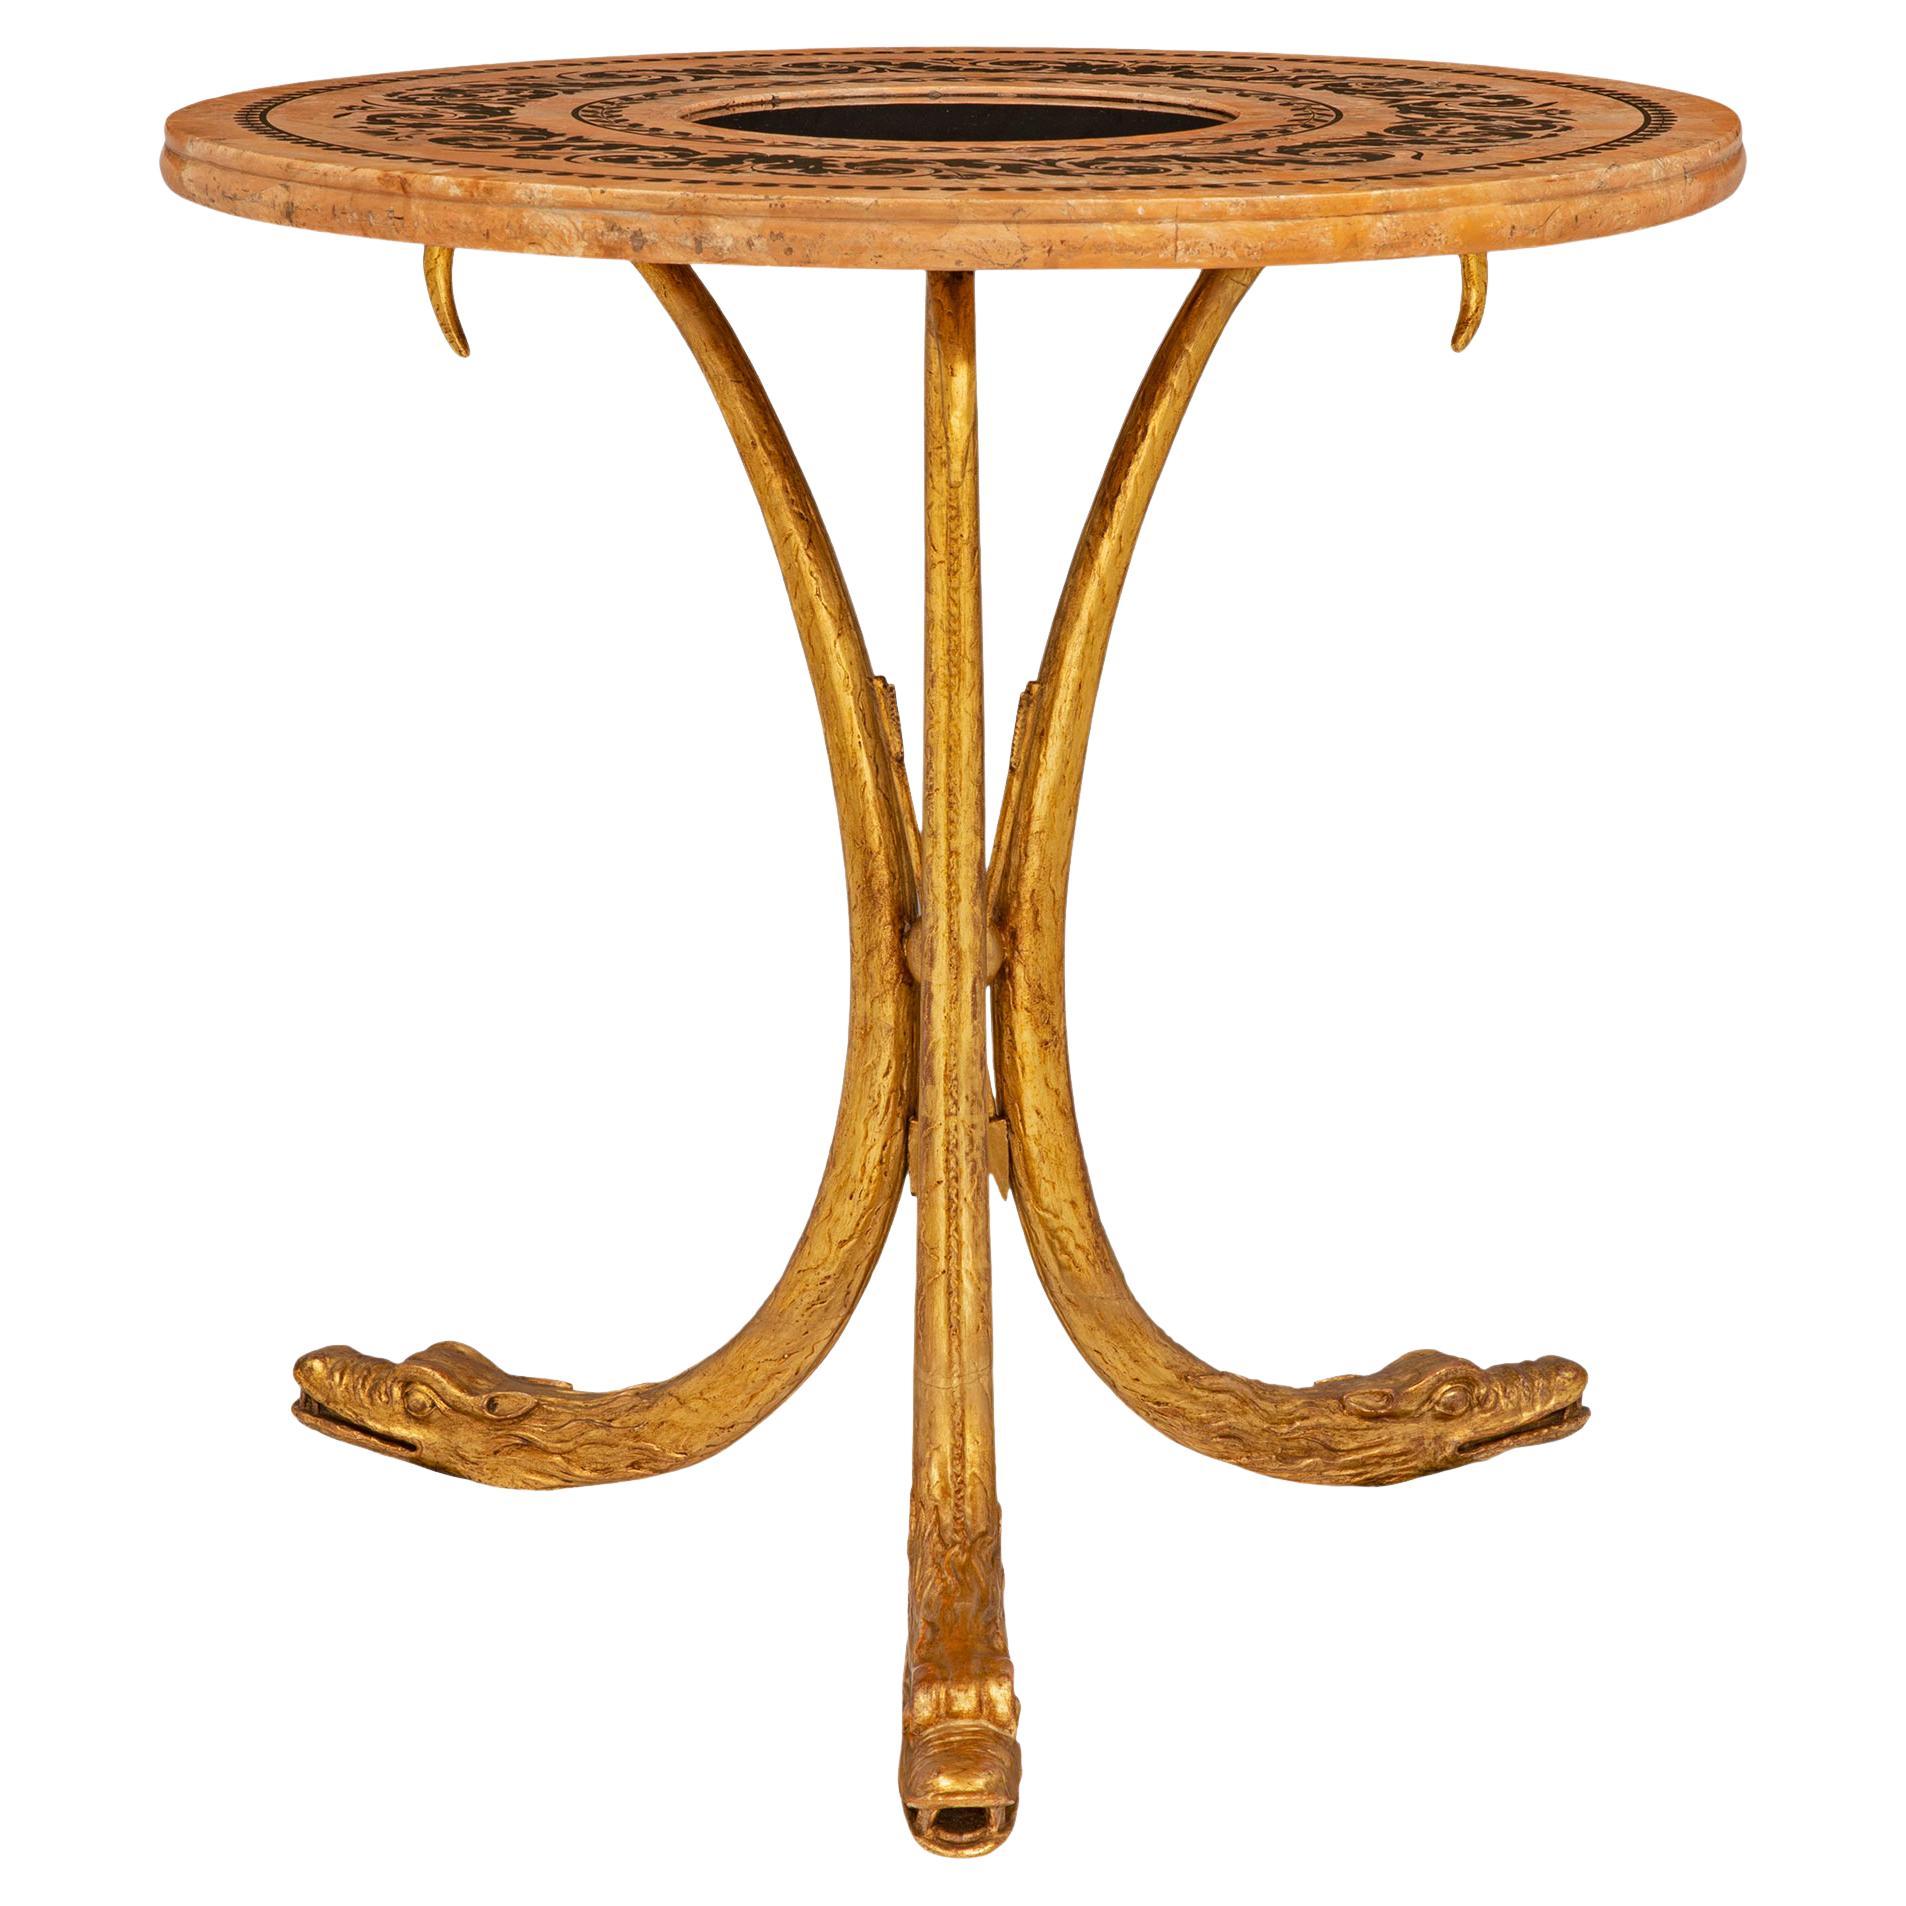 Italian 19th Century Neoclassical Style Center Table For Sale